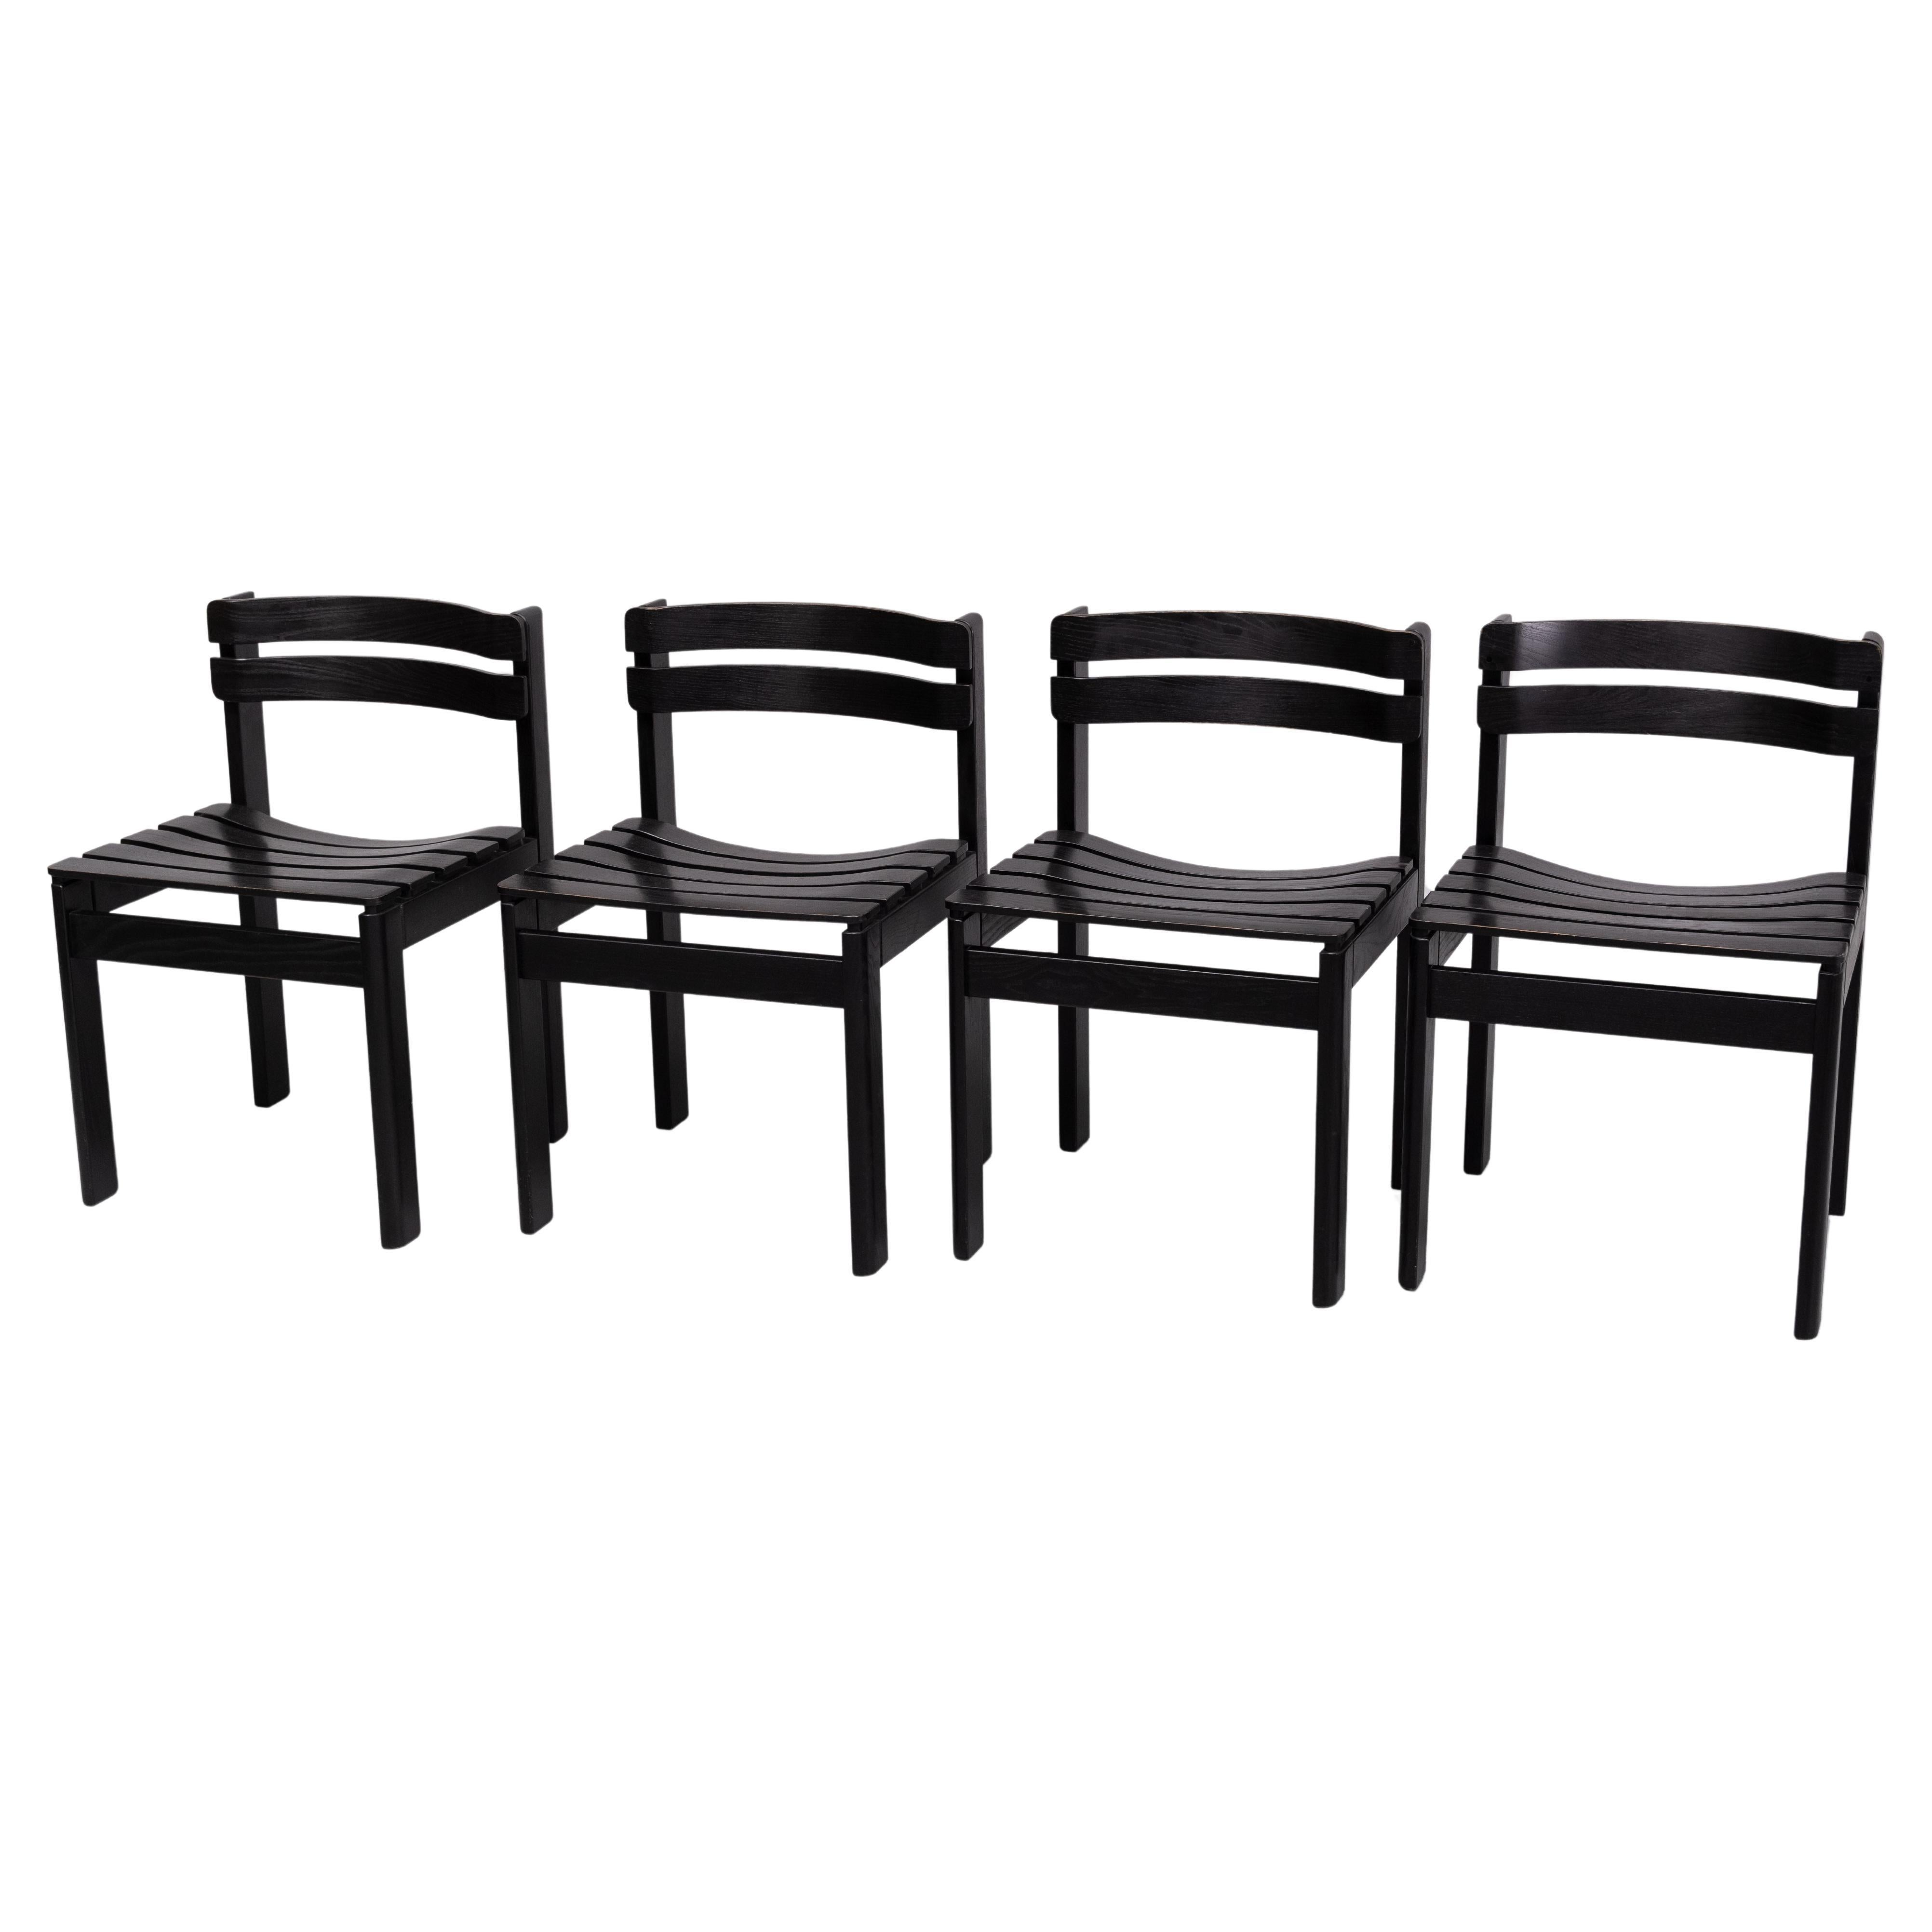 The chairs feature a solid Oak wood structure that has been painted black. The design in particularly appealing because of its curved slats, both for the seat and backrest. The backrest slats are positioned in a sort of forward design. The overall